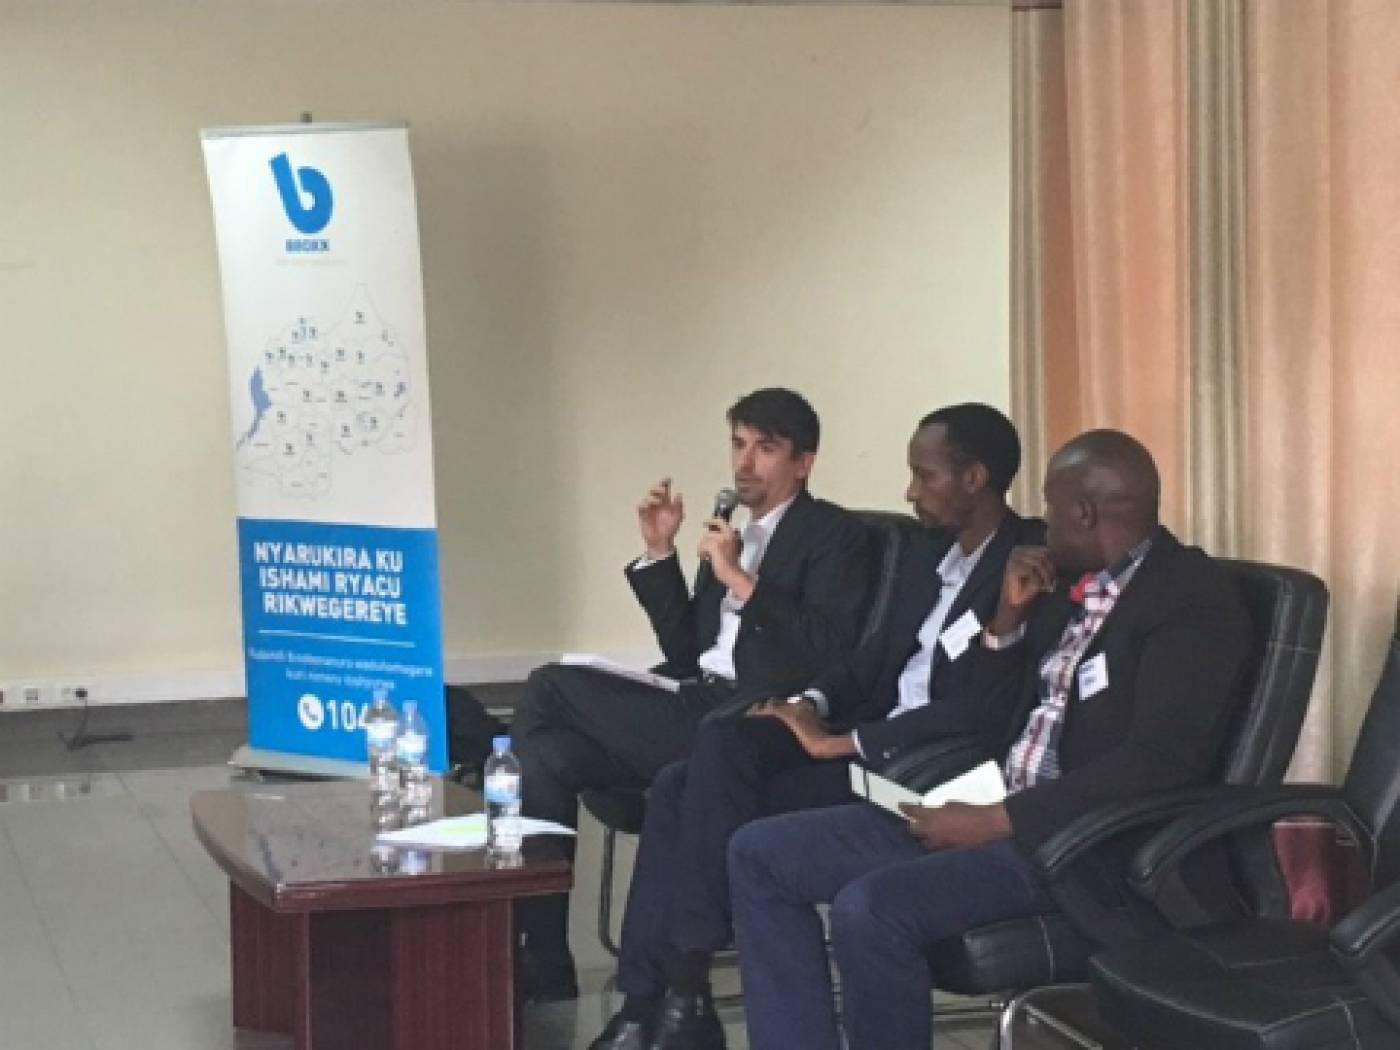 Simon Rolland (EnDev), Justus Mucyo (BBOXX) and Morris Kayitare (EDCL), answer questions from the audience.